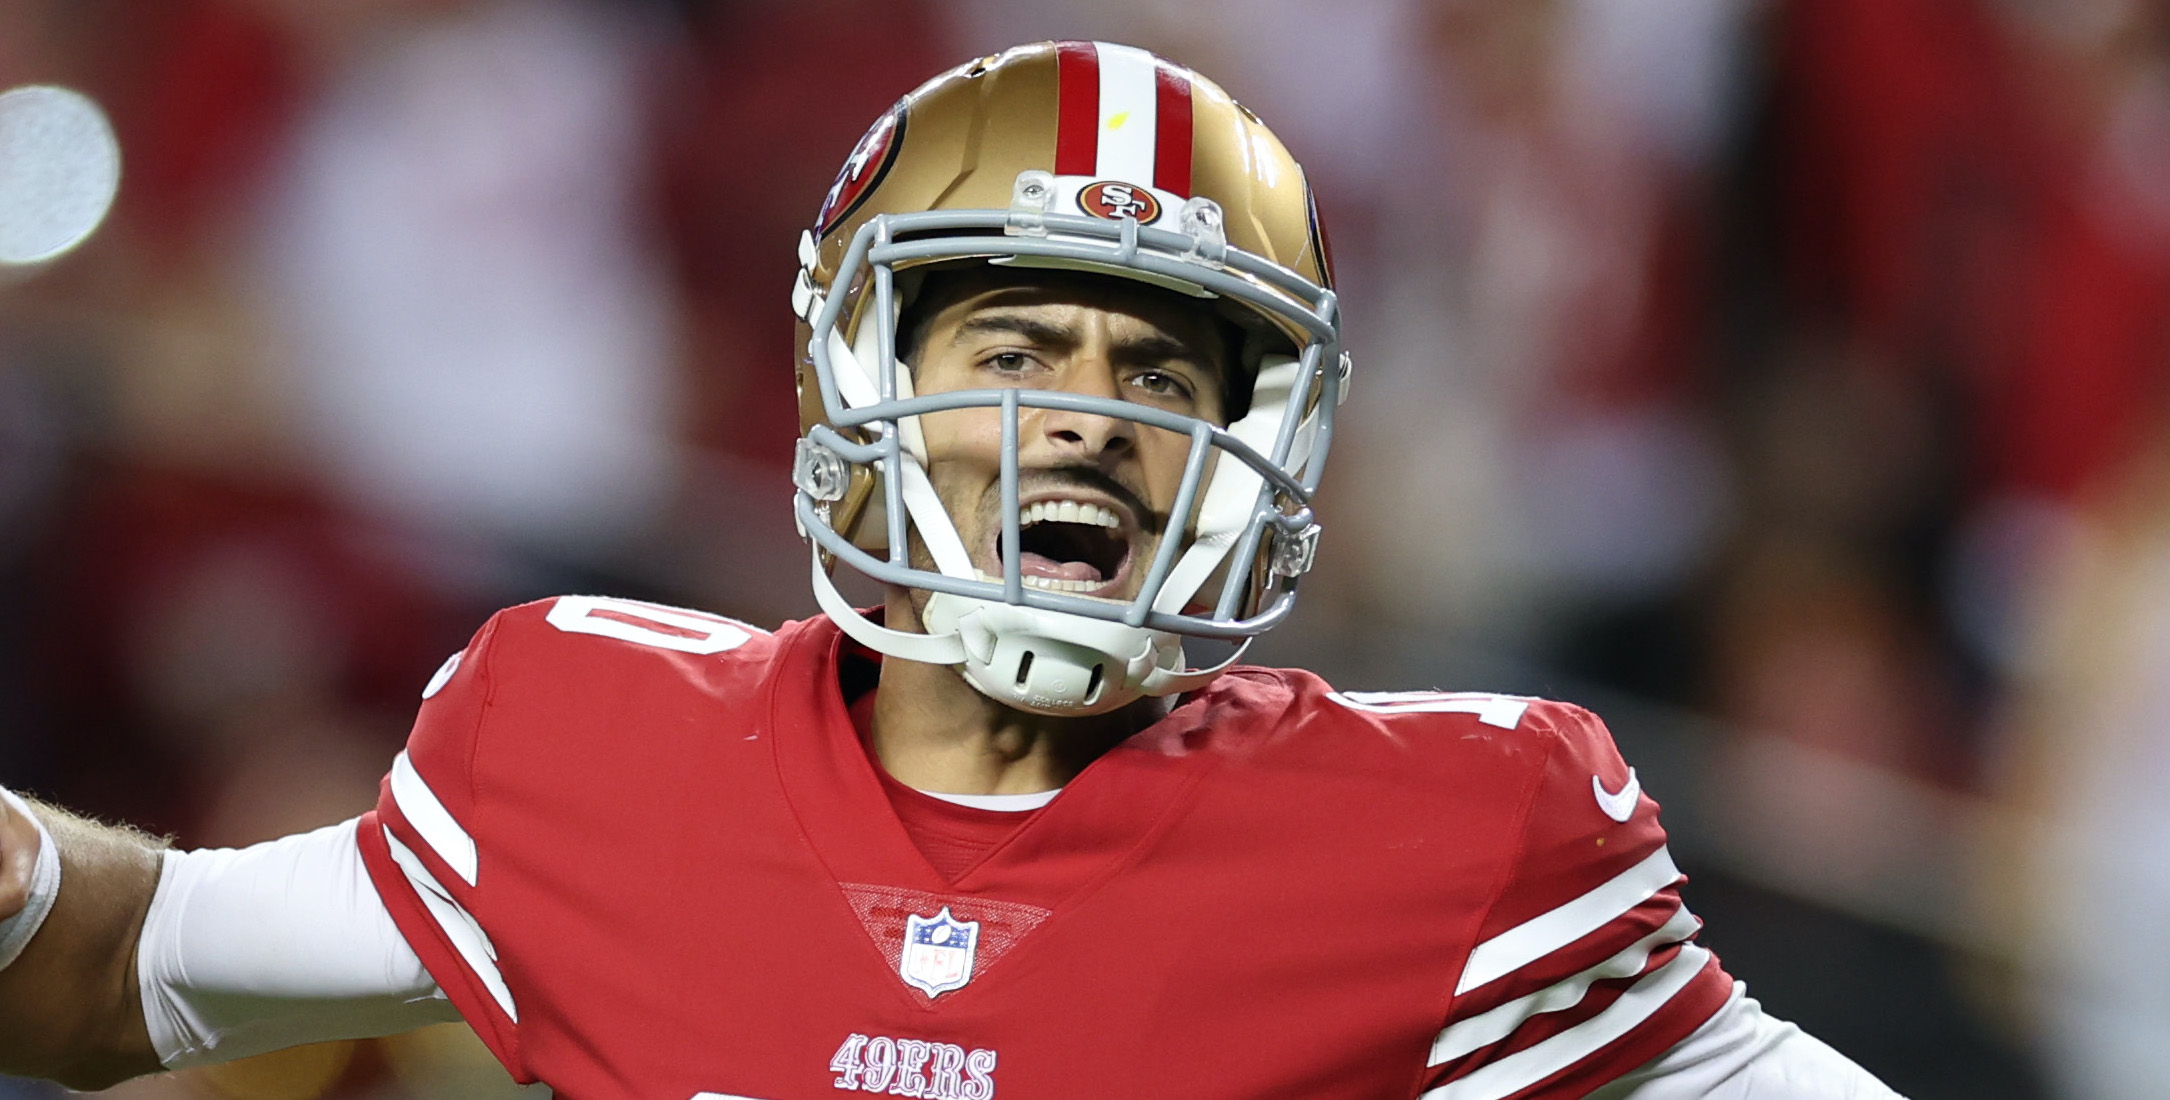 Cardinals-49ers: MNF Week 11 Best Bets For Mexico City Game